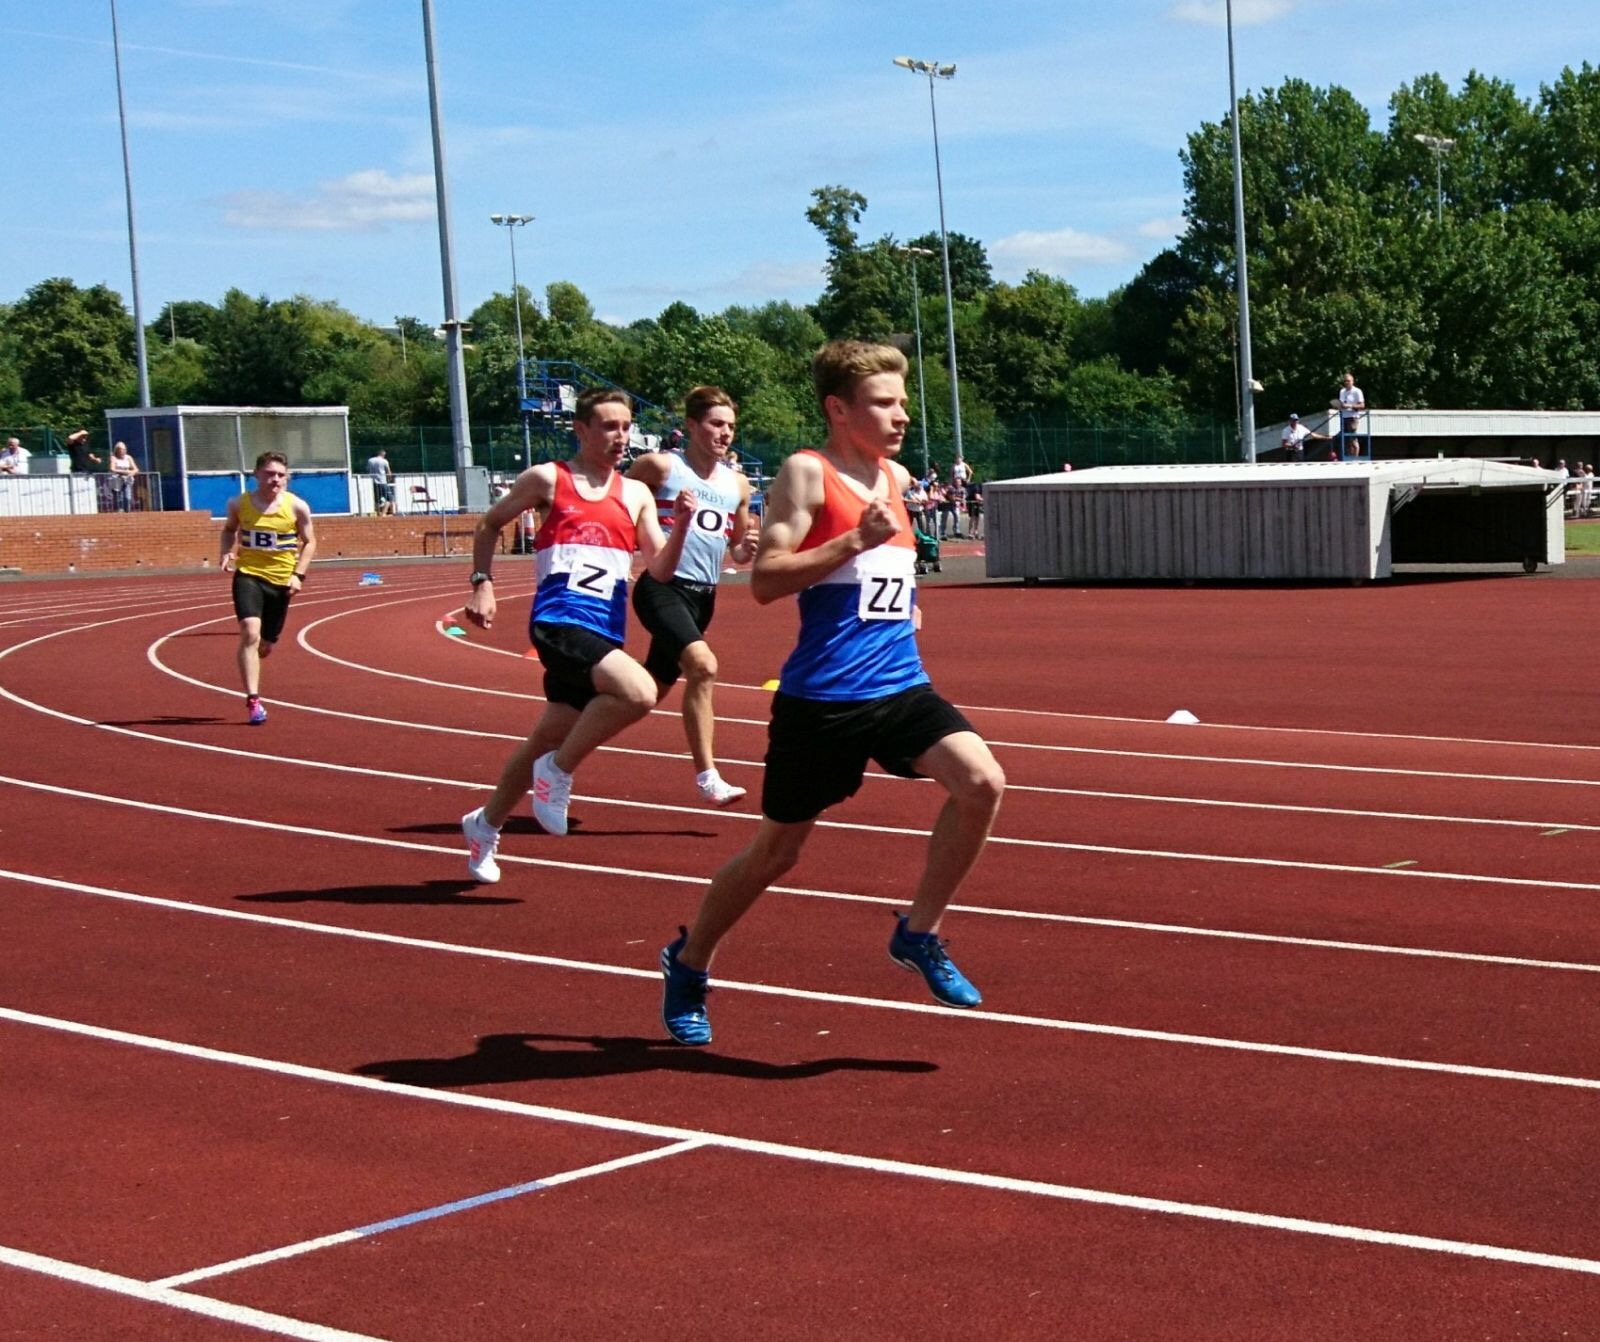 Midlands Track and Field Championships – 19-20th August 2017